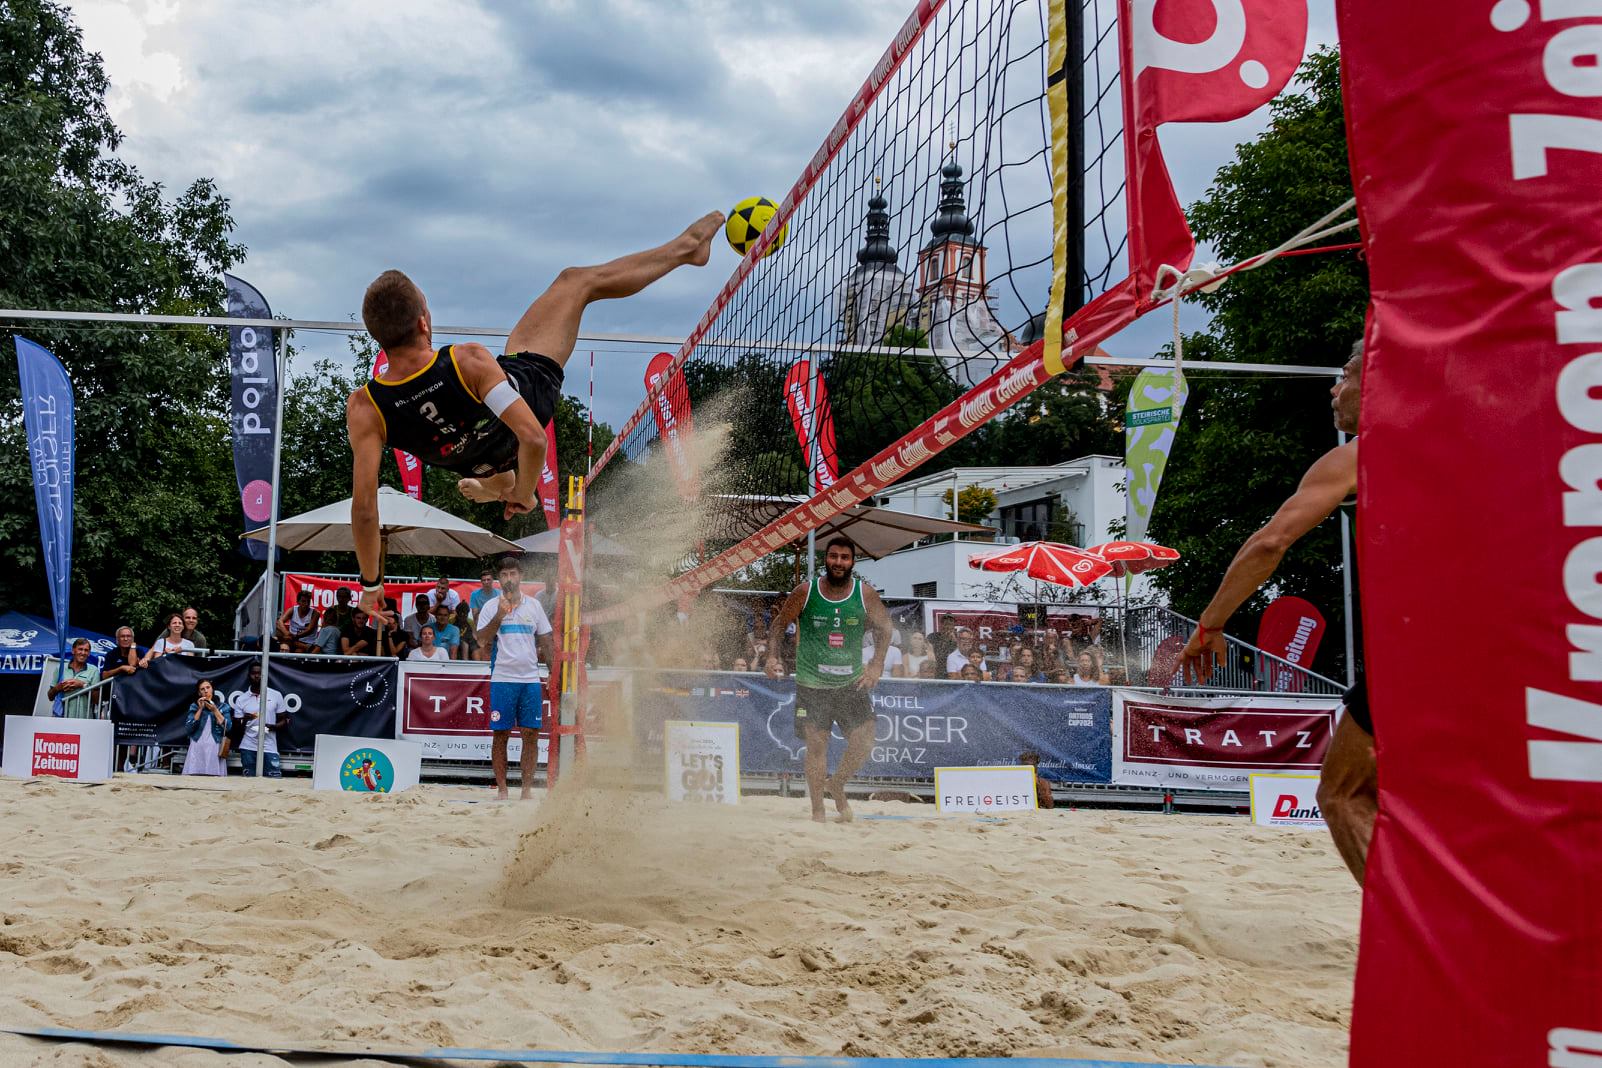 This picture shows footvolley.